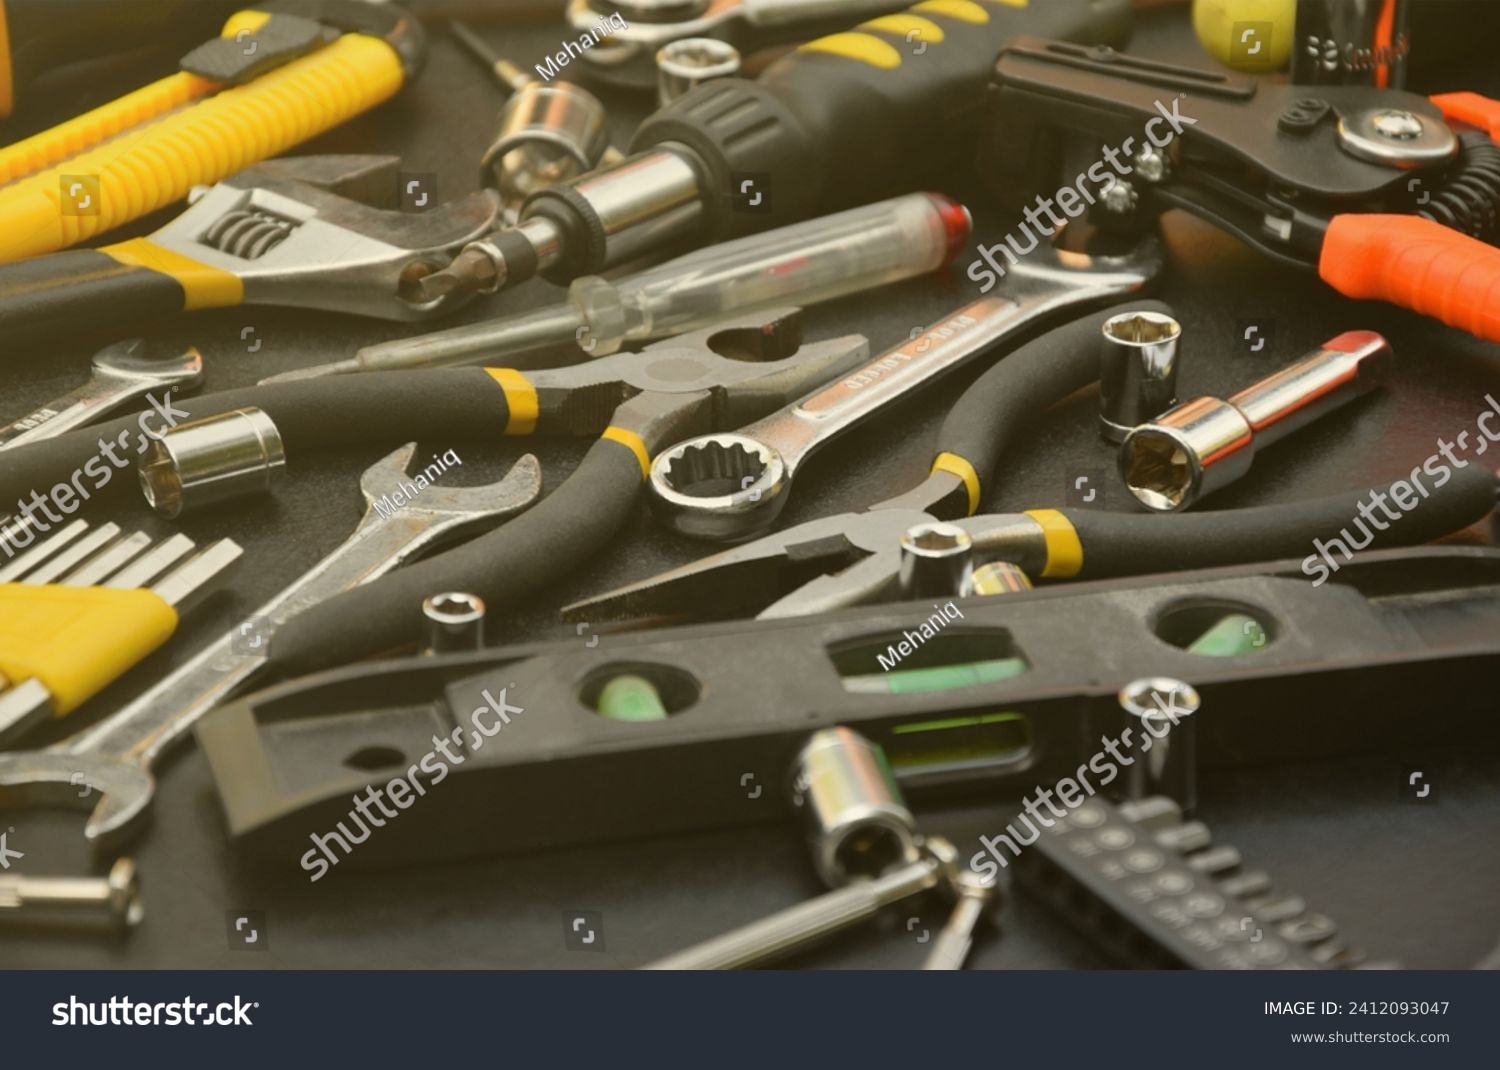 Handyman tool kit on black wooden table. Many wrenches and screwdrivers, pilers and other tools for any types of repair or construction works. Repairman tools set #2412093047